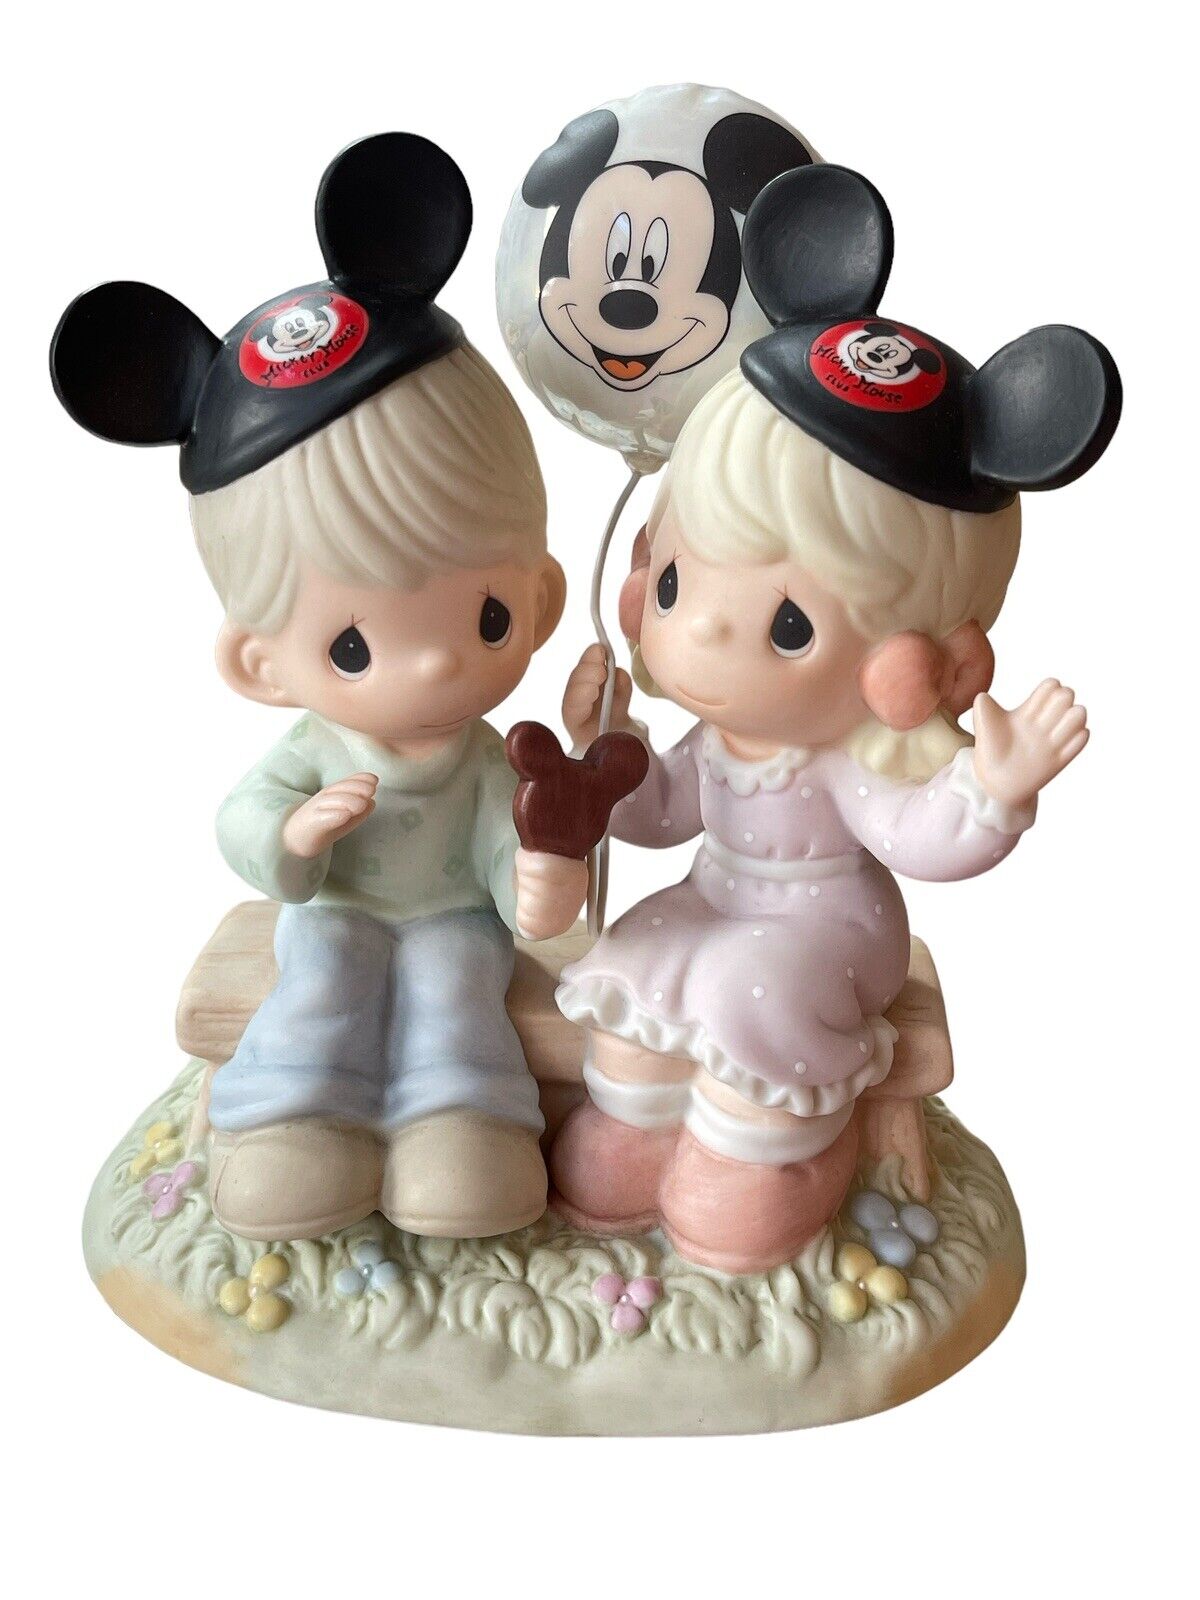 Disney Parks Event Precious Moments Figurine Happiness Is Best Shared Together